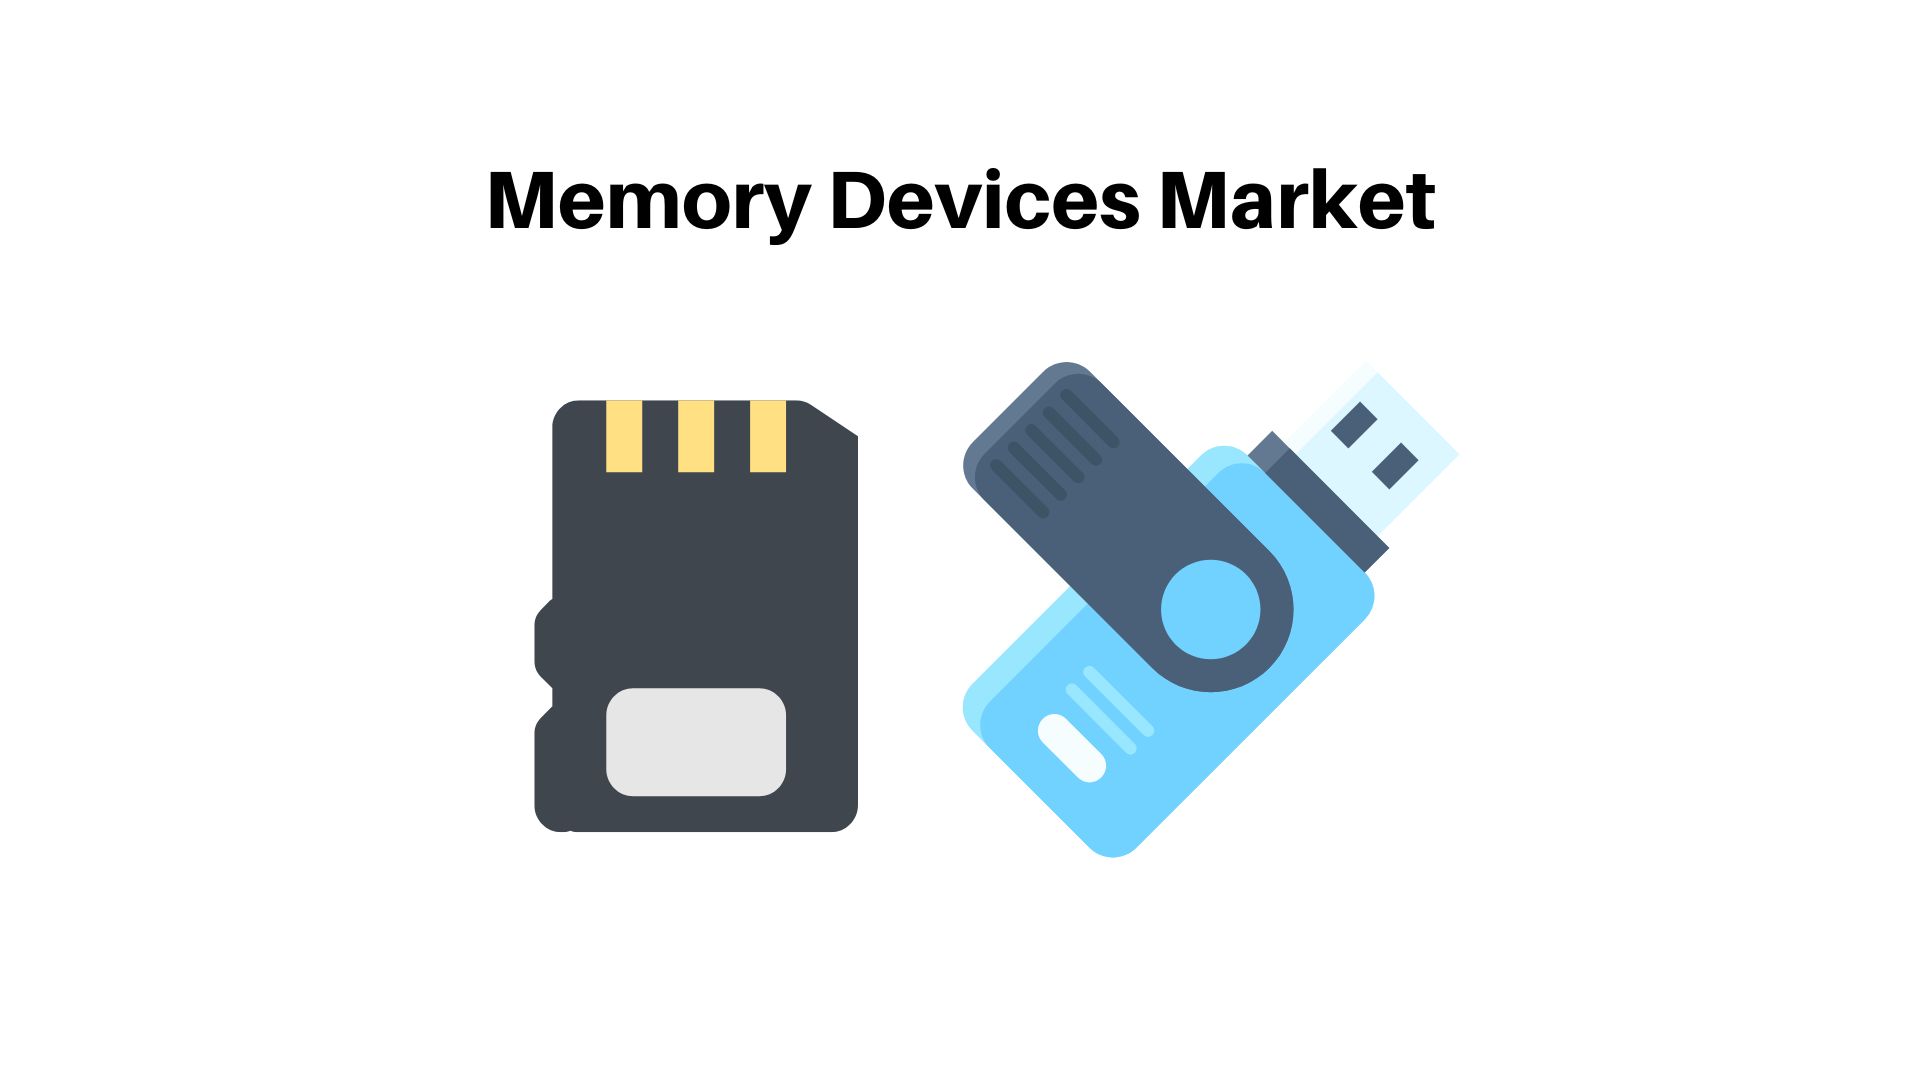 Memory Devices Market to Reach USD 528.0 Billion by 2032, Says Market.us Research Study